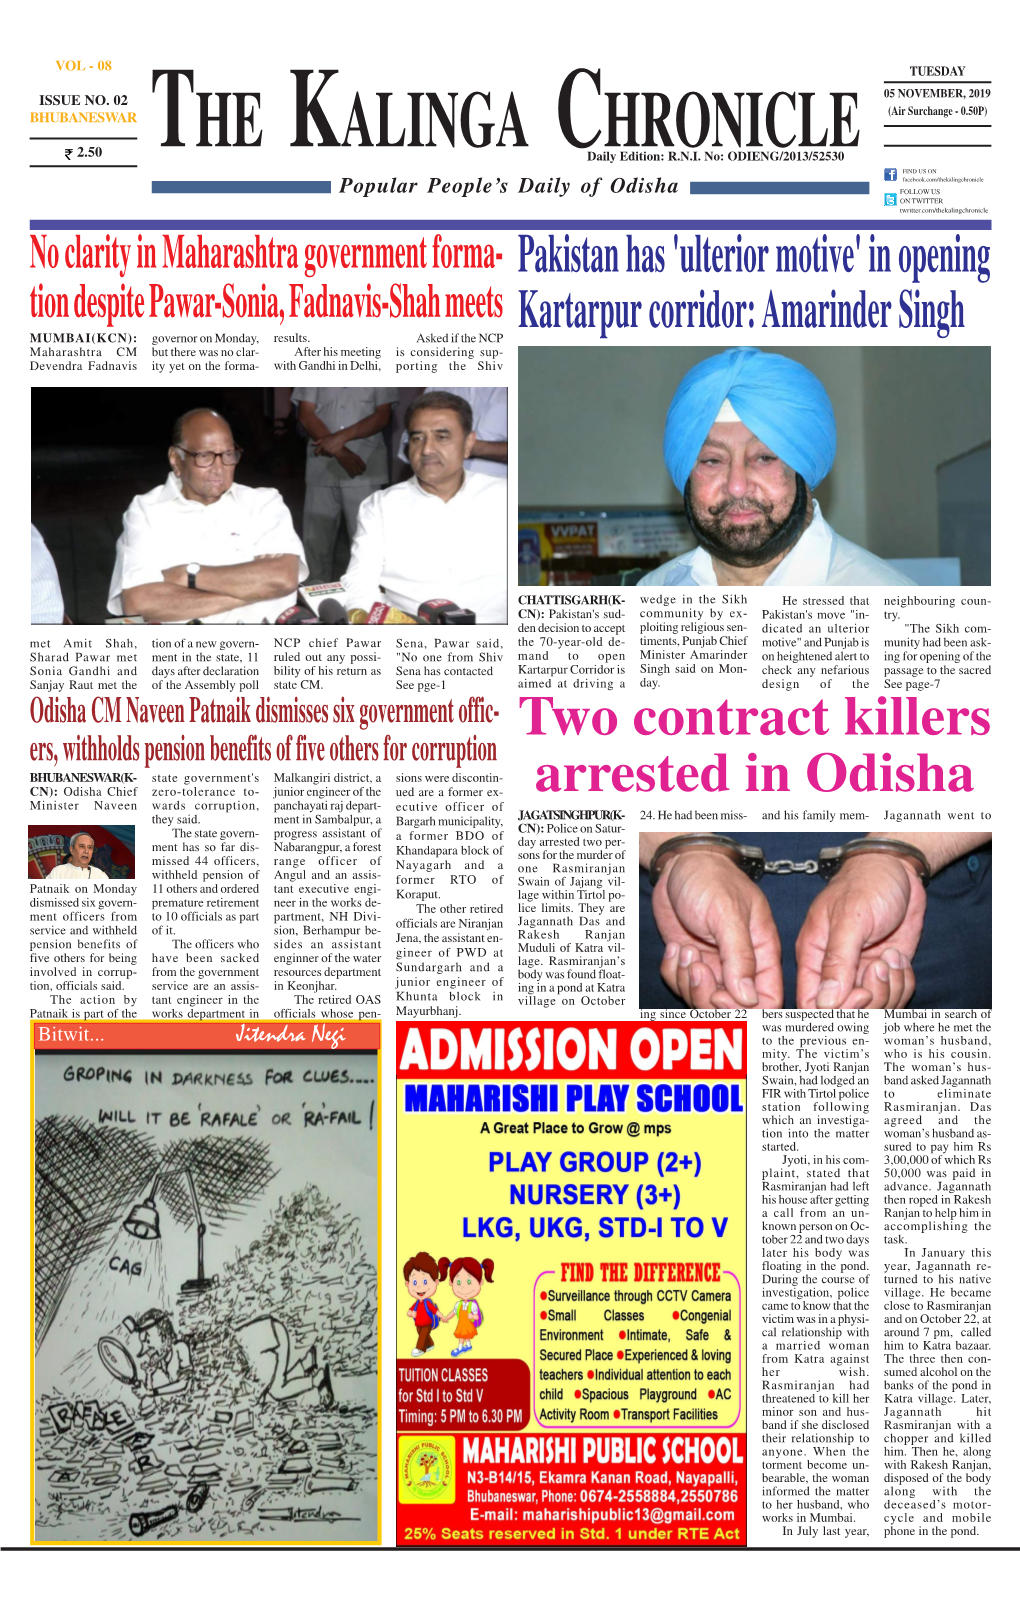 Two Contract Killers Arrested in Odisha